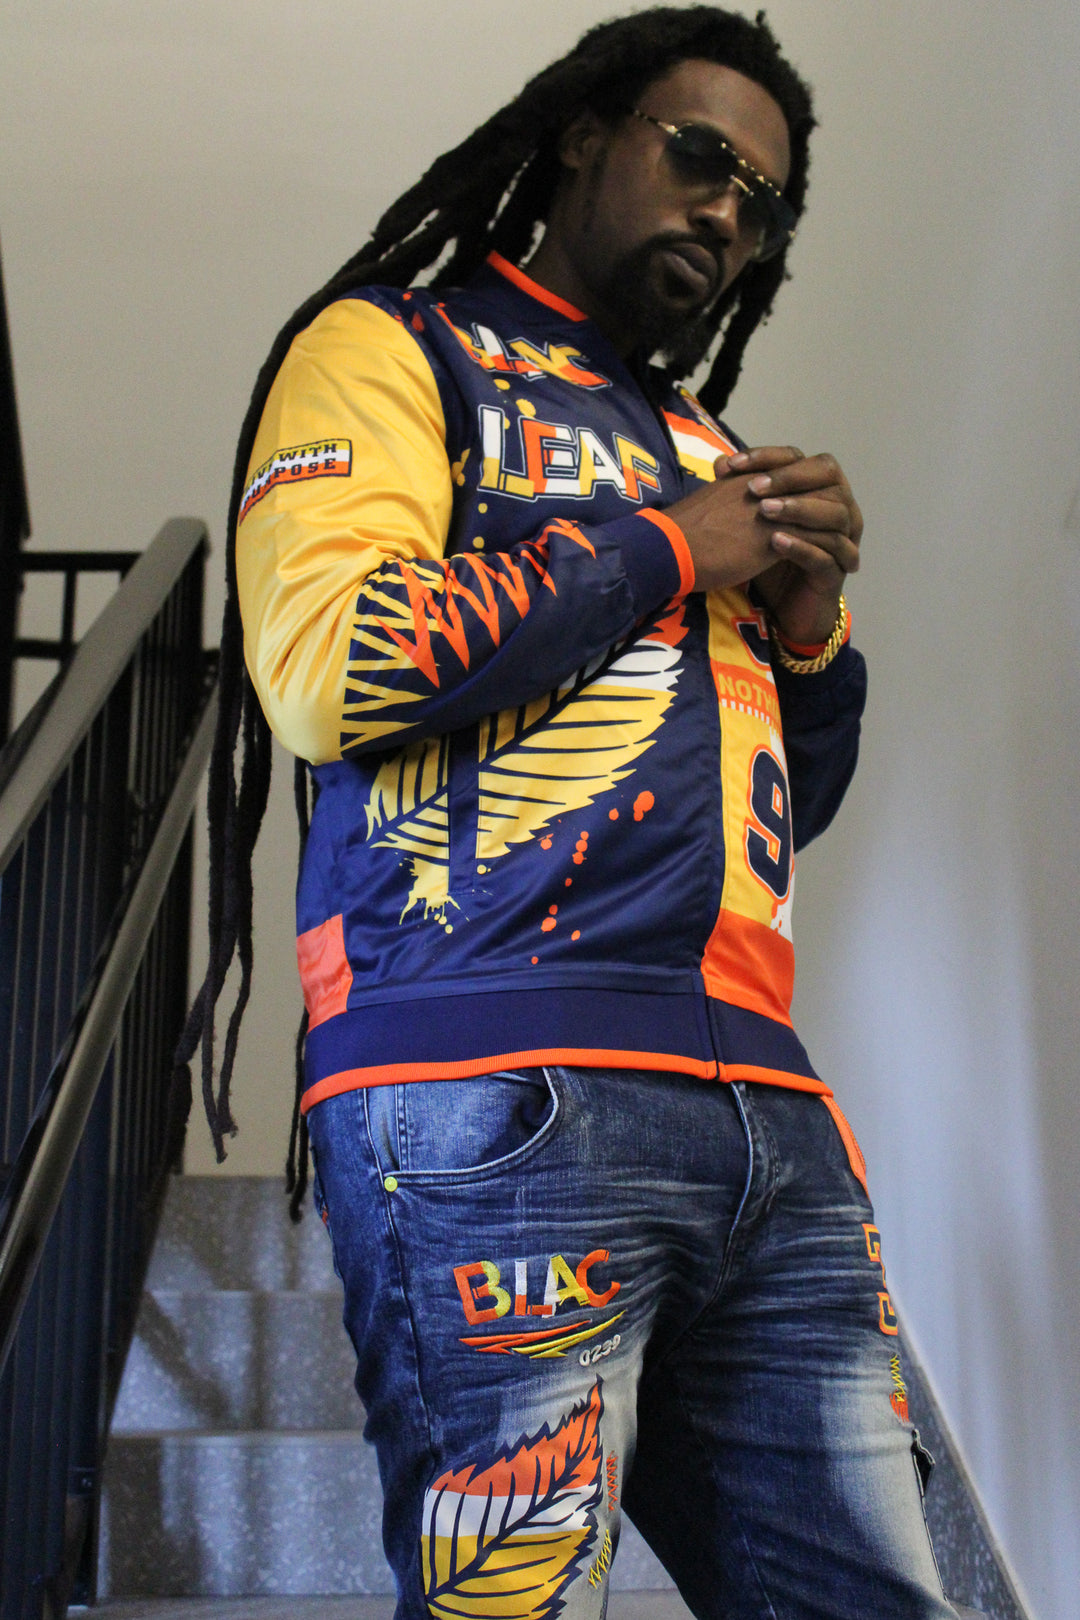 BLAC LEAF NOTHING LIKE THE REST BOMBER JACKET BIG&TALL